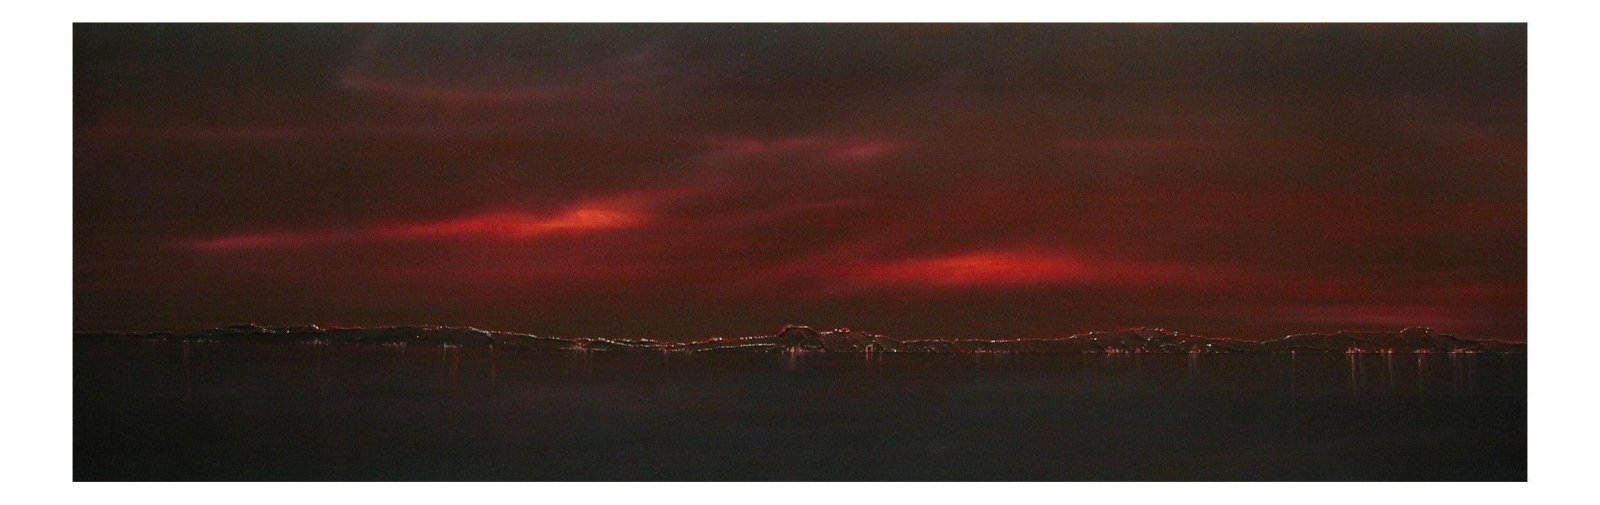 Clyde Winter Dusk-Panoramic Prints-River Clyde Art Gallery-Paintings, Prints, Homeware, Art Gifts From Scotland By Scottish Artist Kevin Hunter